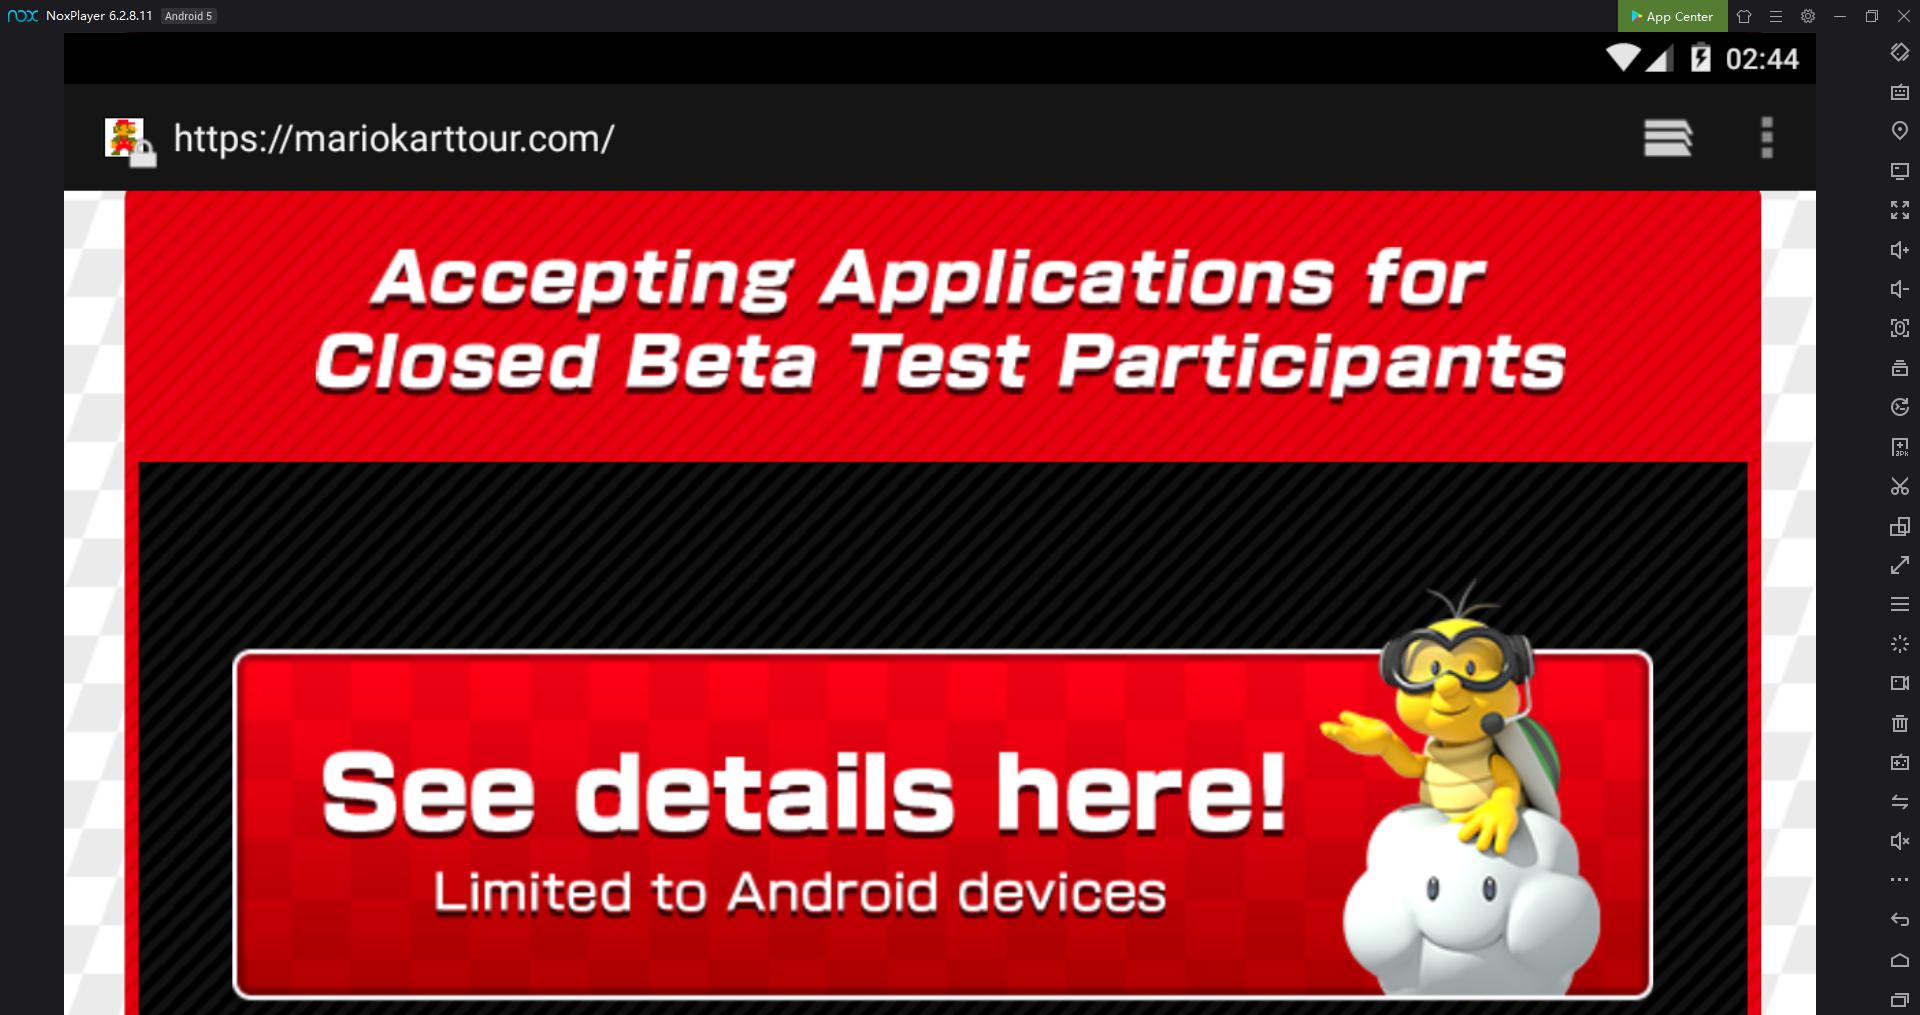 Mario Kart Tour Closed Beta coming to Android mobile devices